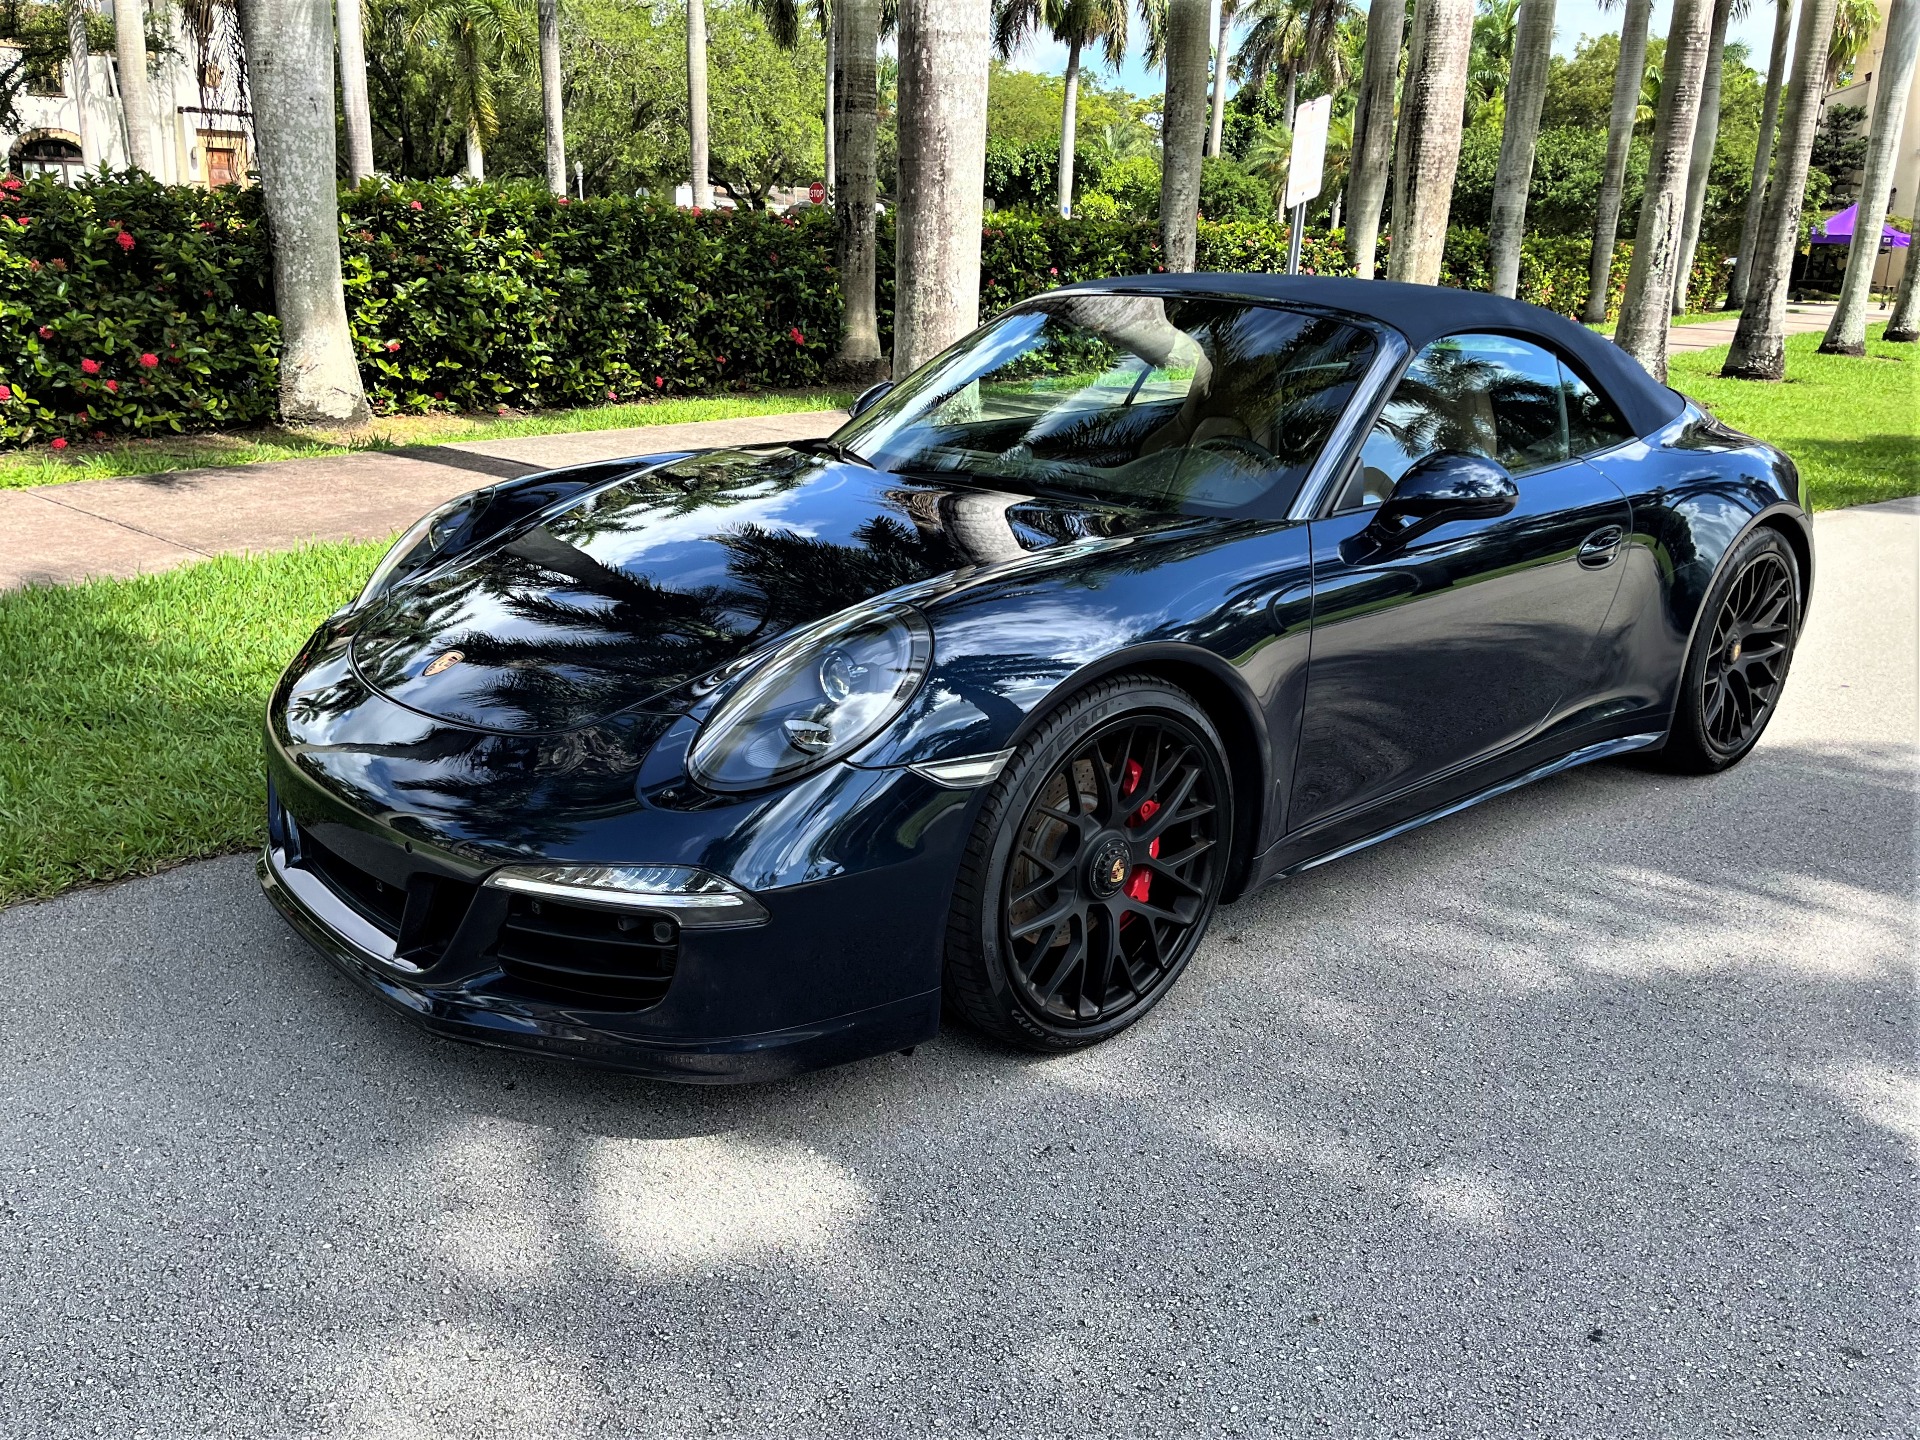 Used 2015 Porsche 911 Carrera GTS for sale Sold at The Gables Sports Cars in Miami FL 33146 4